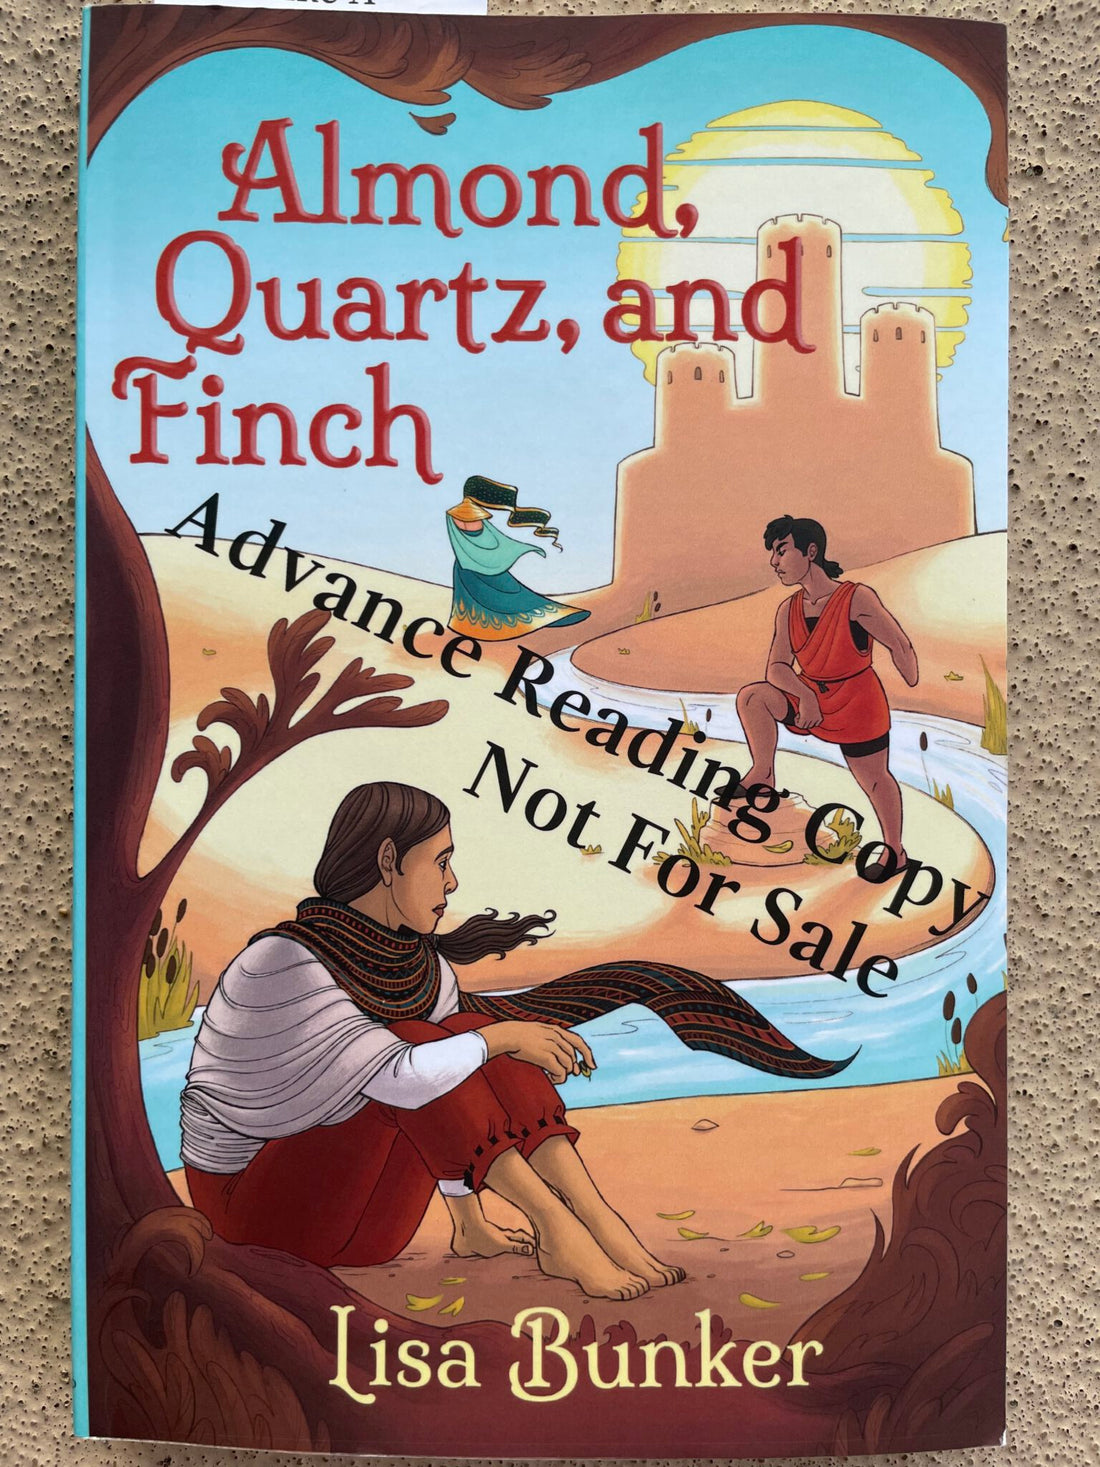 Book Review: Almond, Quartz, and Finch by Liza Bunker